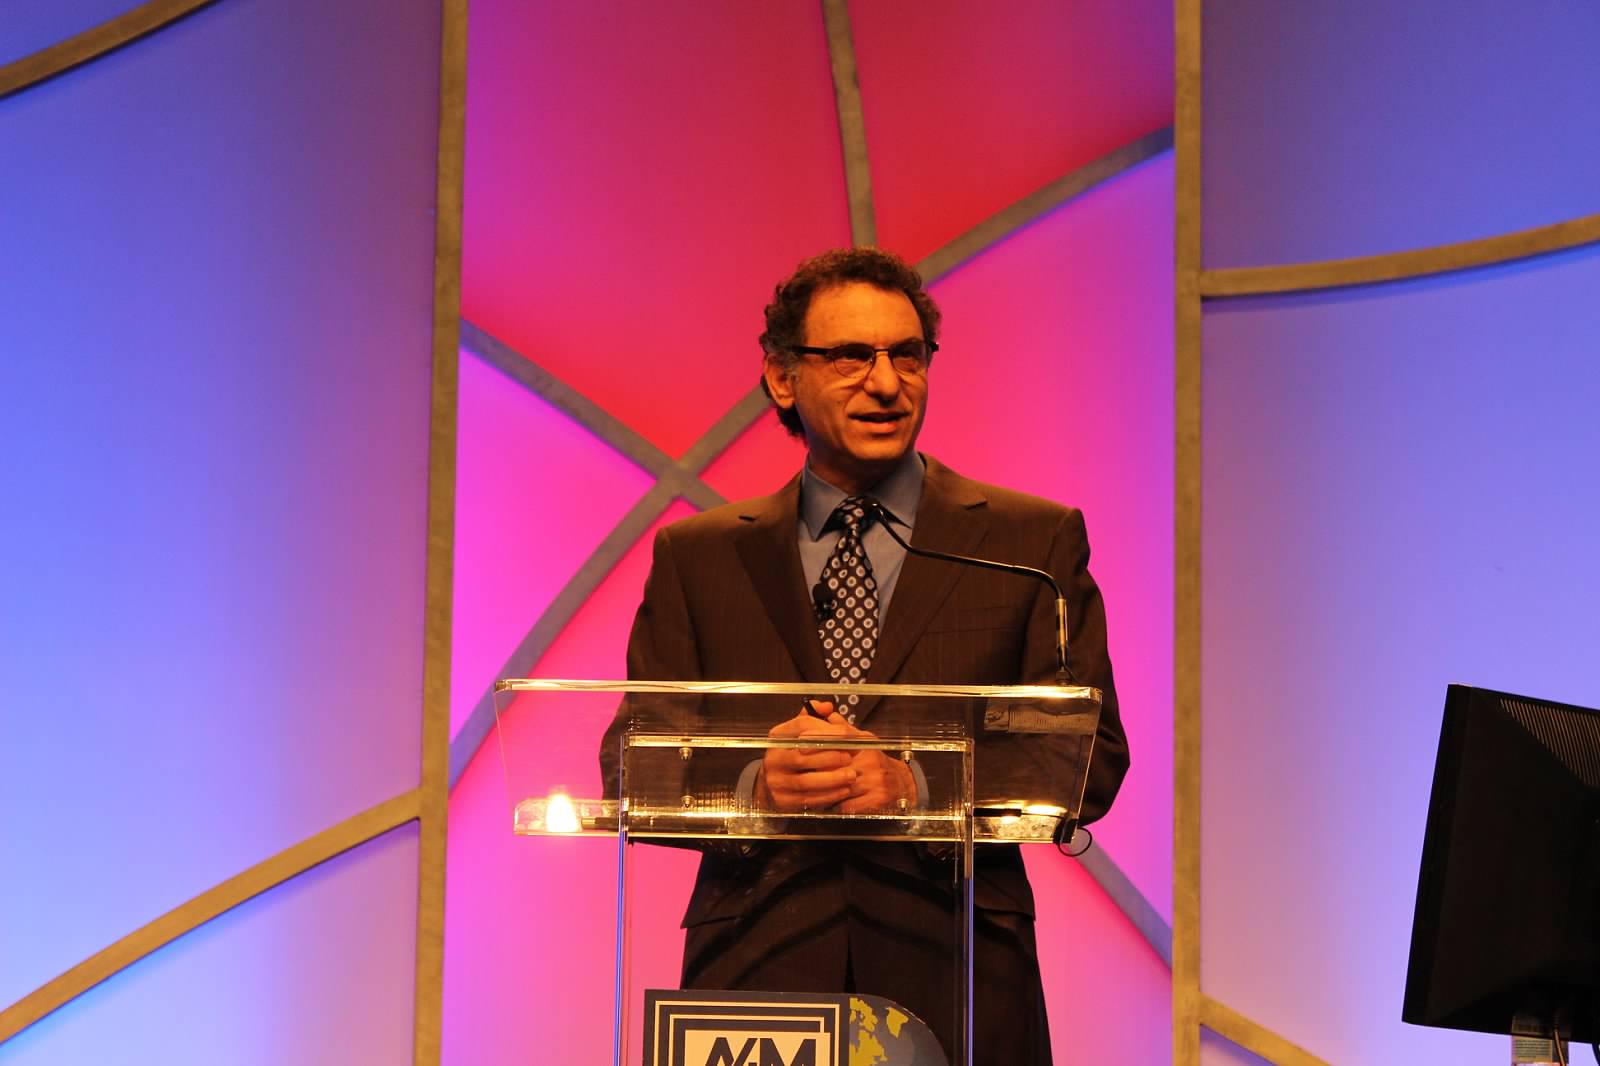 Abraham Morgentaler, MD, FACS speaks on Testosterone Therapy in Men during Friday's general session lecture.